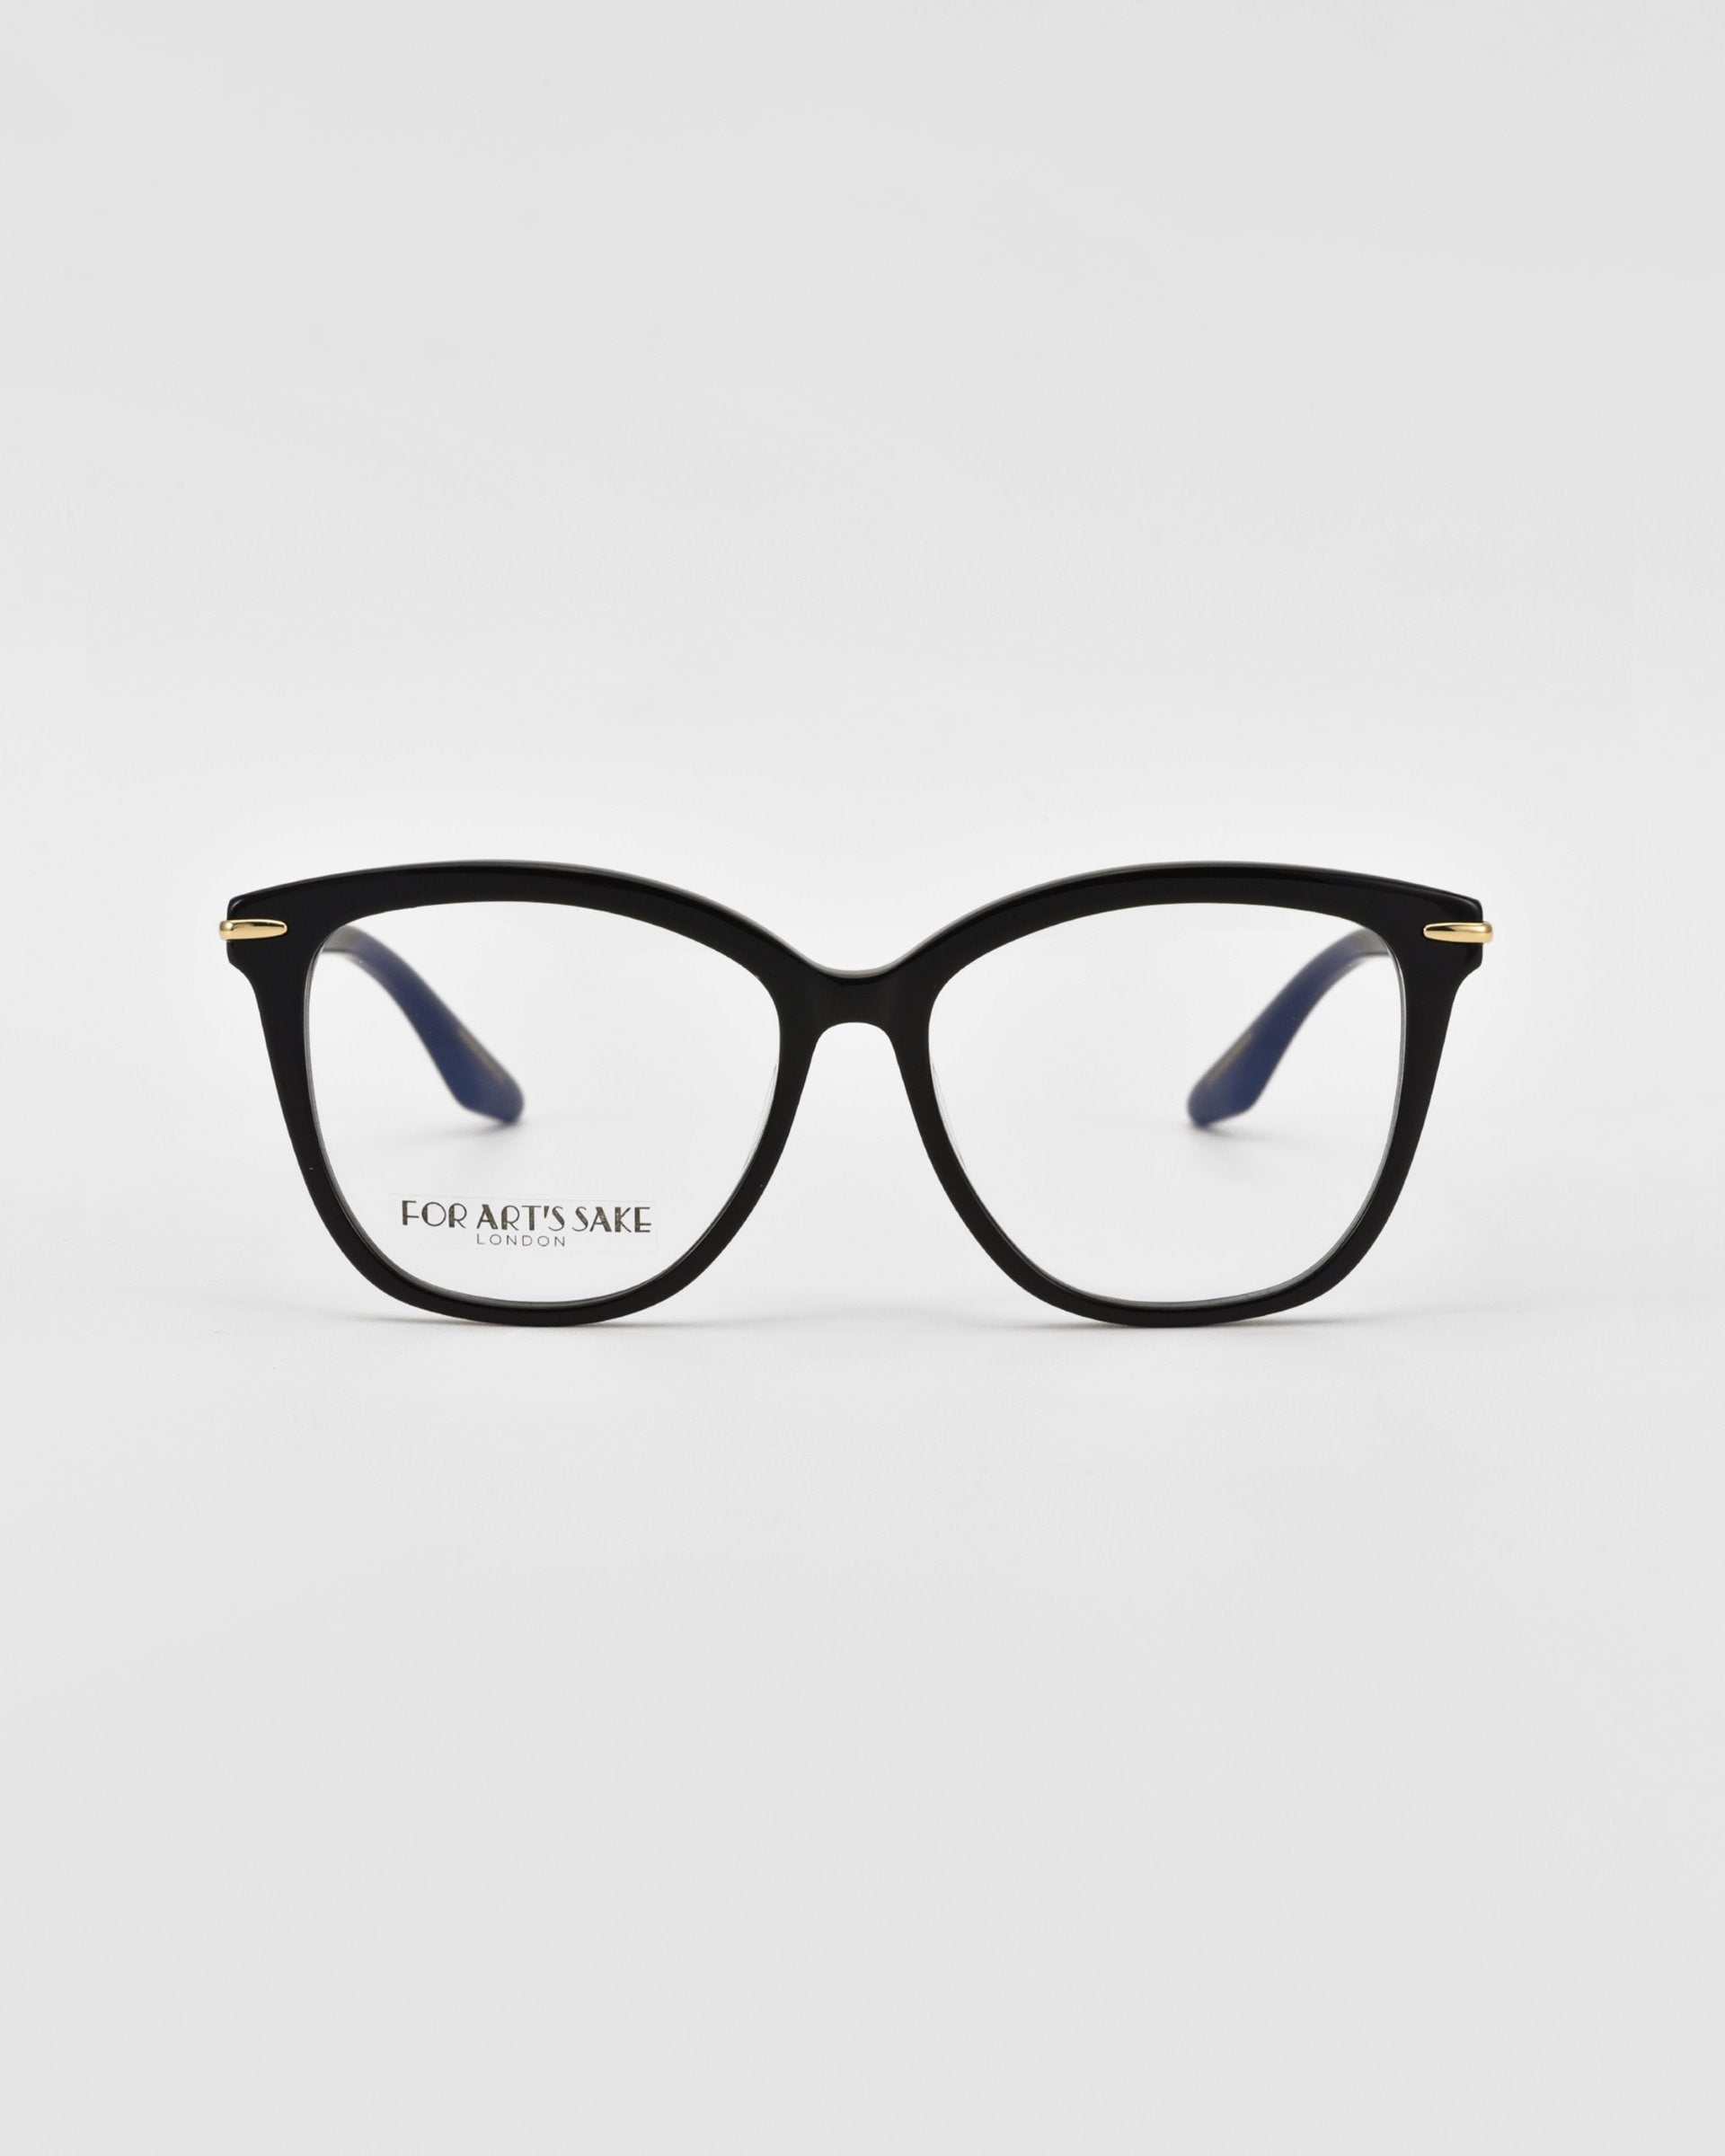 A pair of black rectangular Cadenza optical glasses with a slight cat-eye shape, featuring gold accents on the temple arms. The glasses are displayed against a plain white background. The brand name "For Art's Sake®" is visible on the inner side of the right lens.